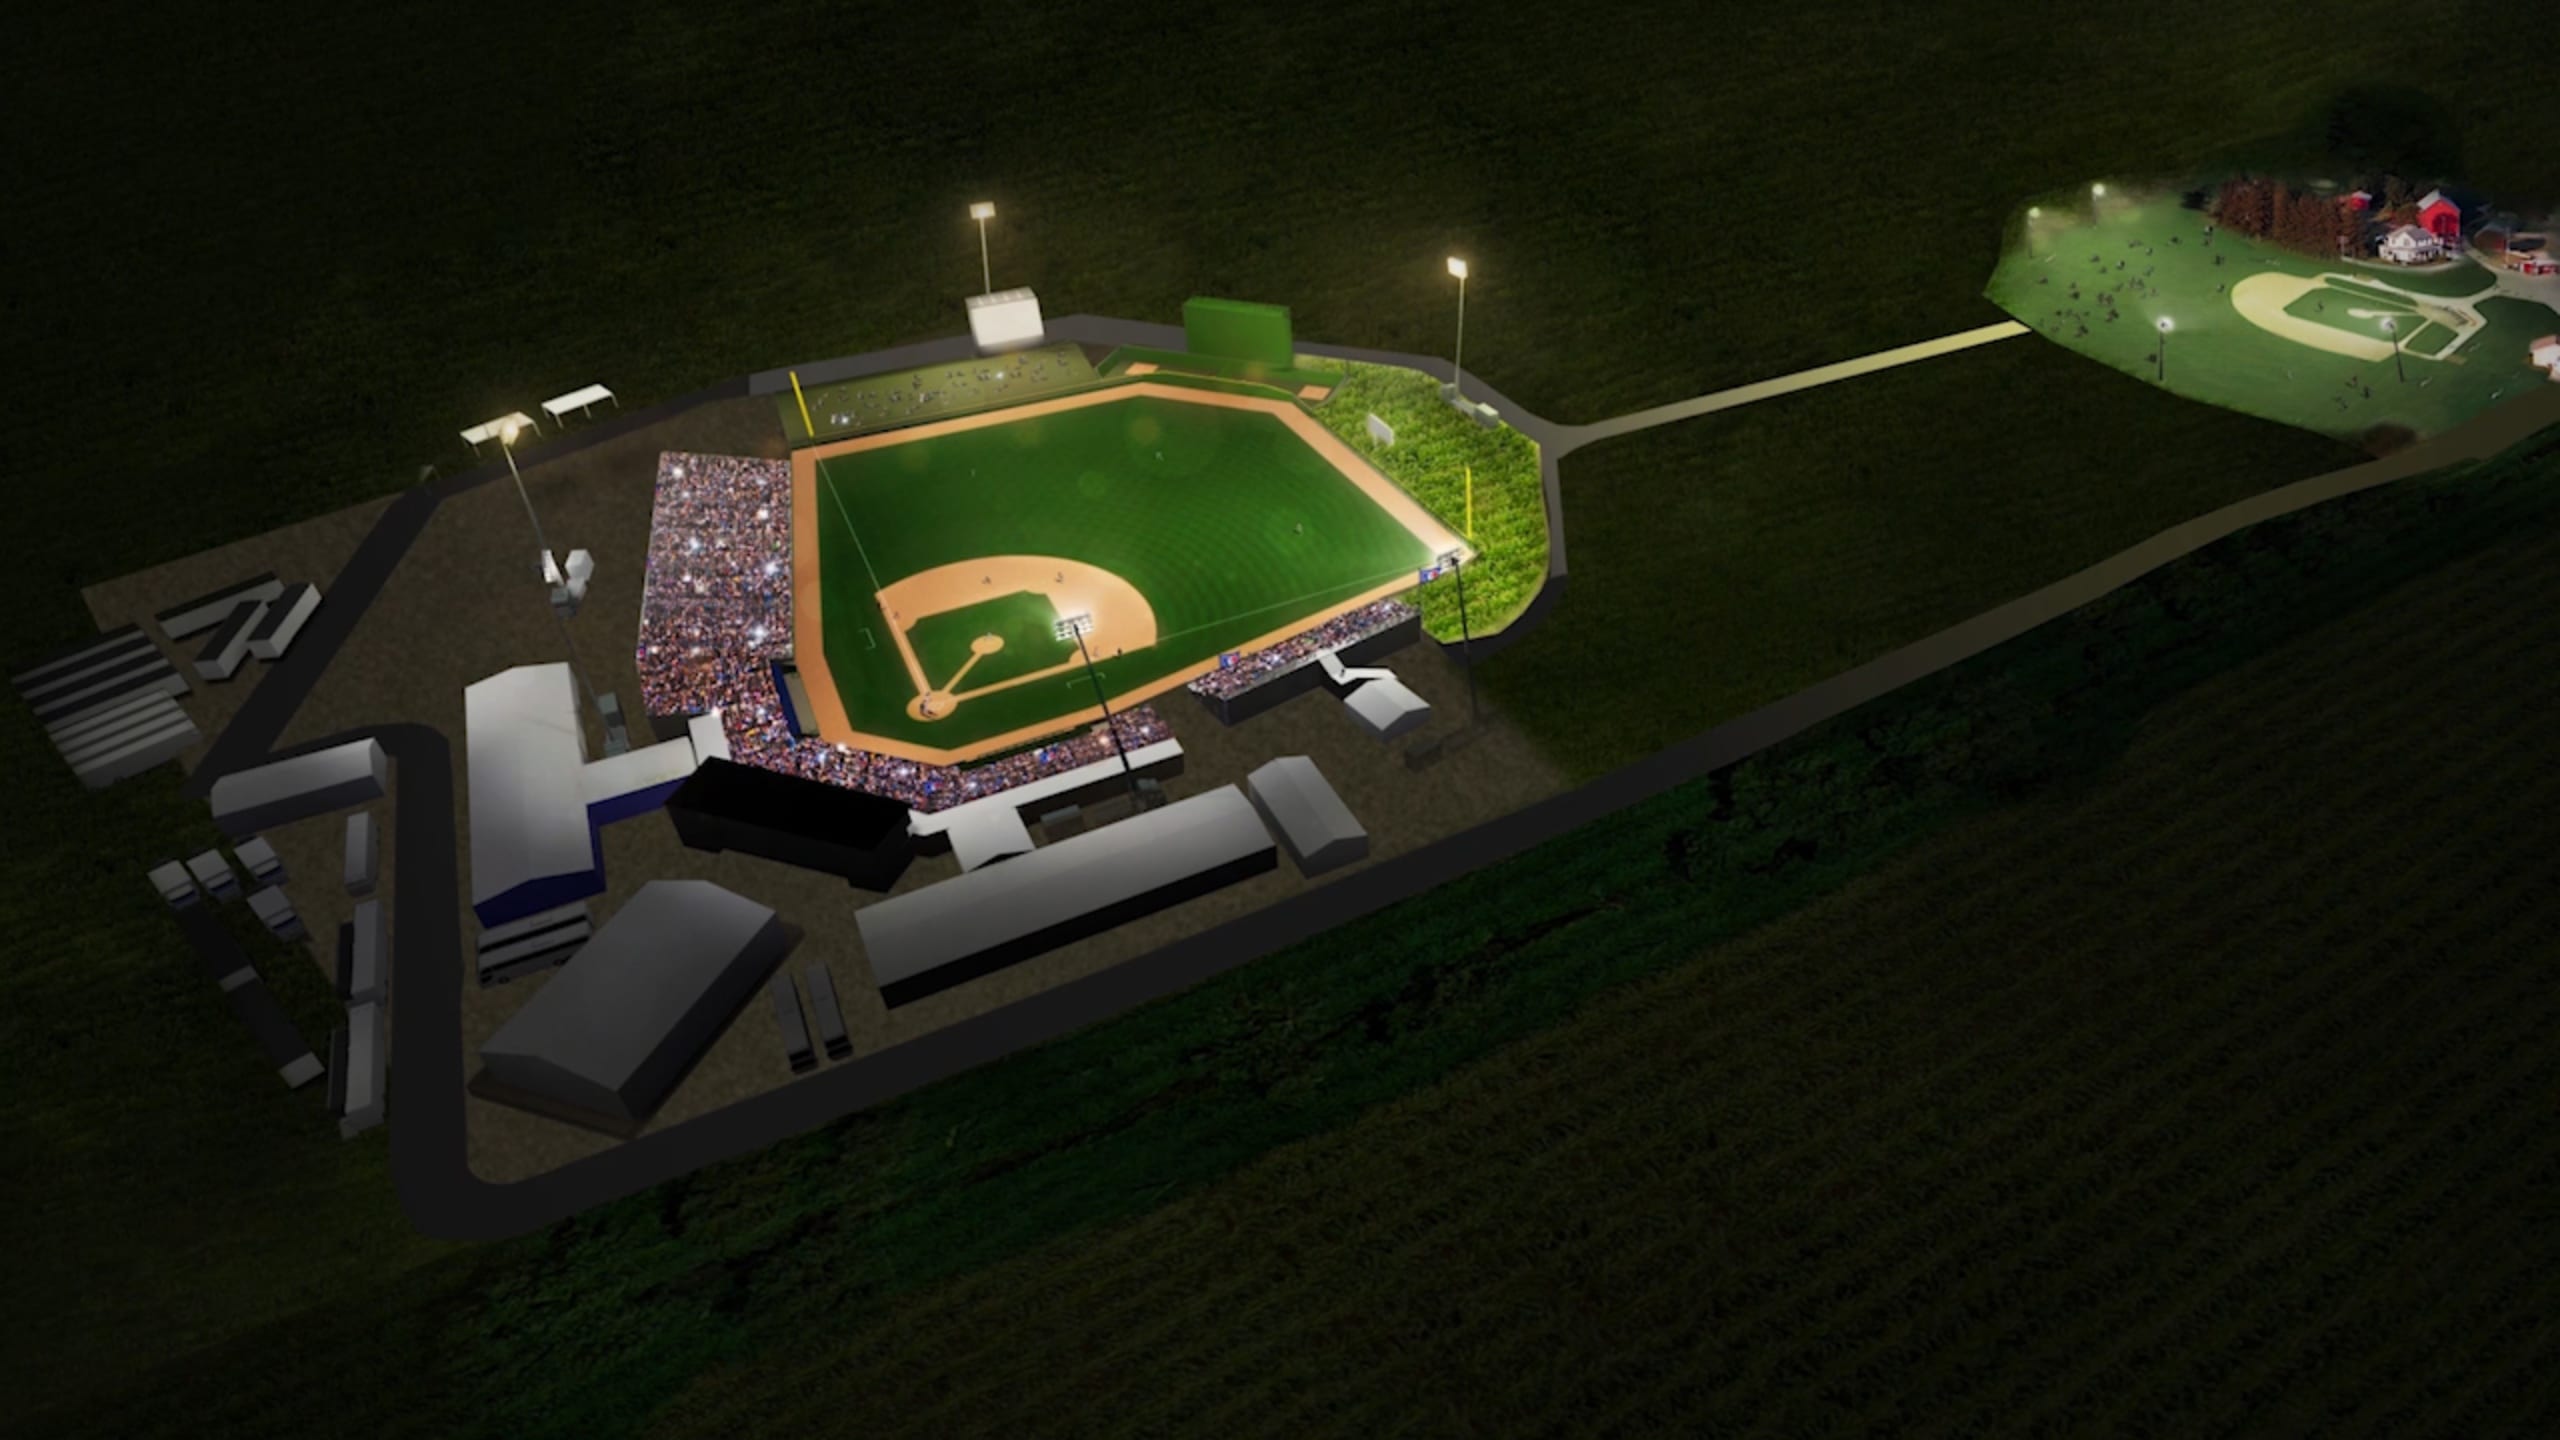 Field of Dreams Game: MLB unveils uniforms, stadium for White Sox vs.  Yankees in Iowa 